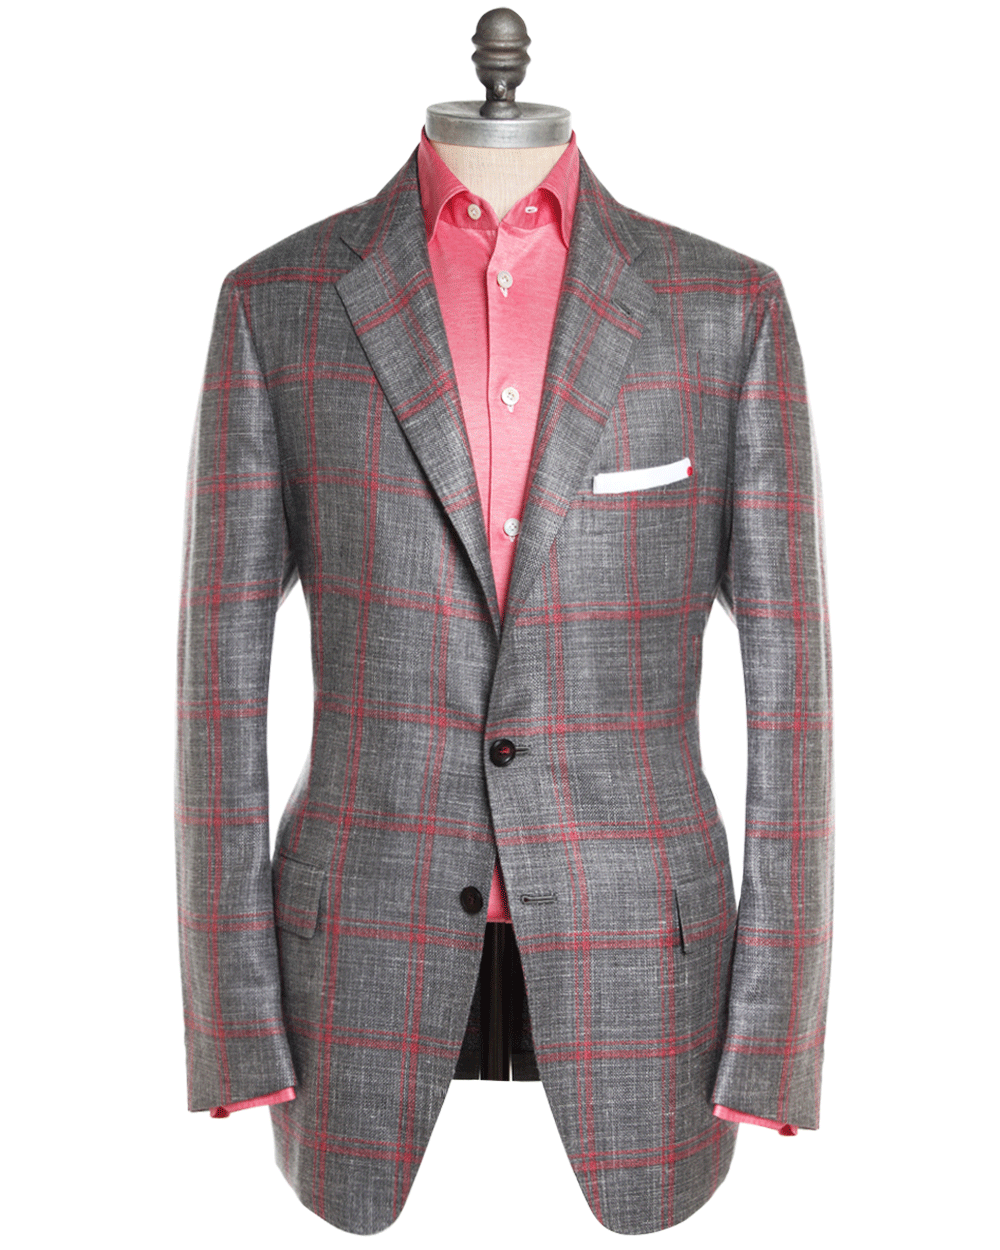 Grey and Red Windowpane Cashmere Blend Sportcoat